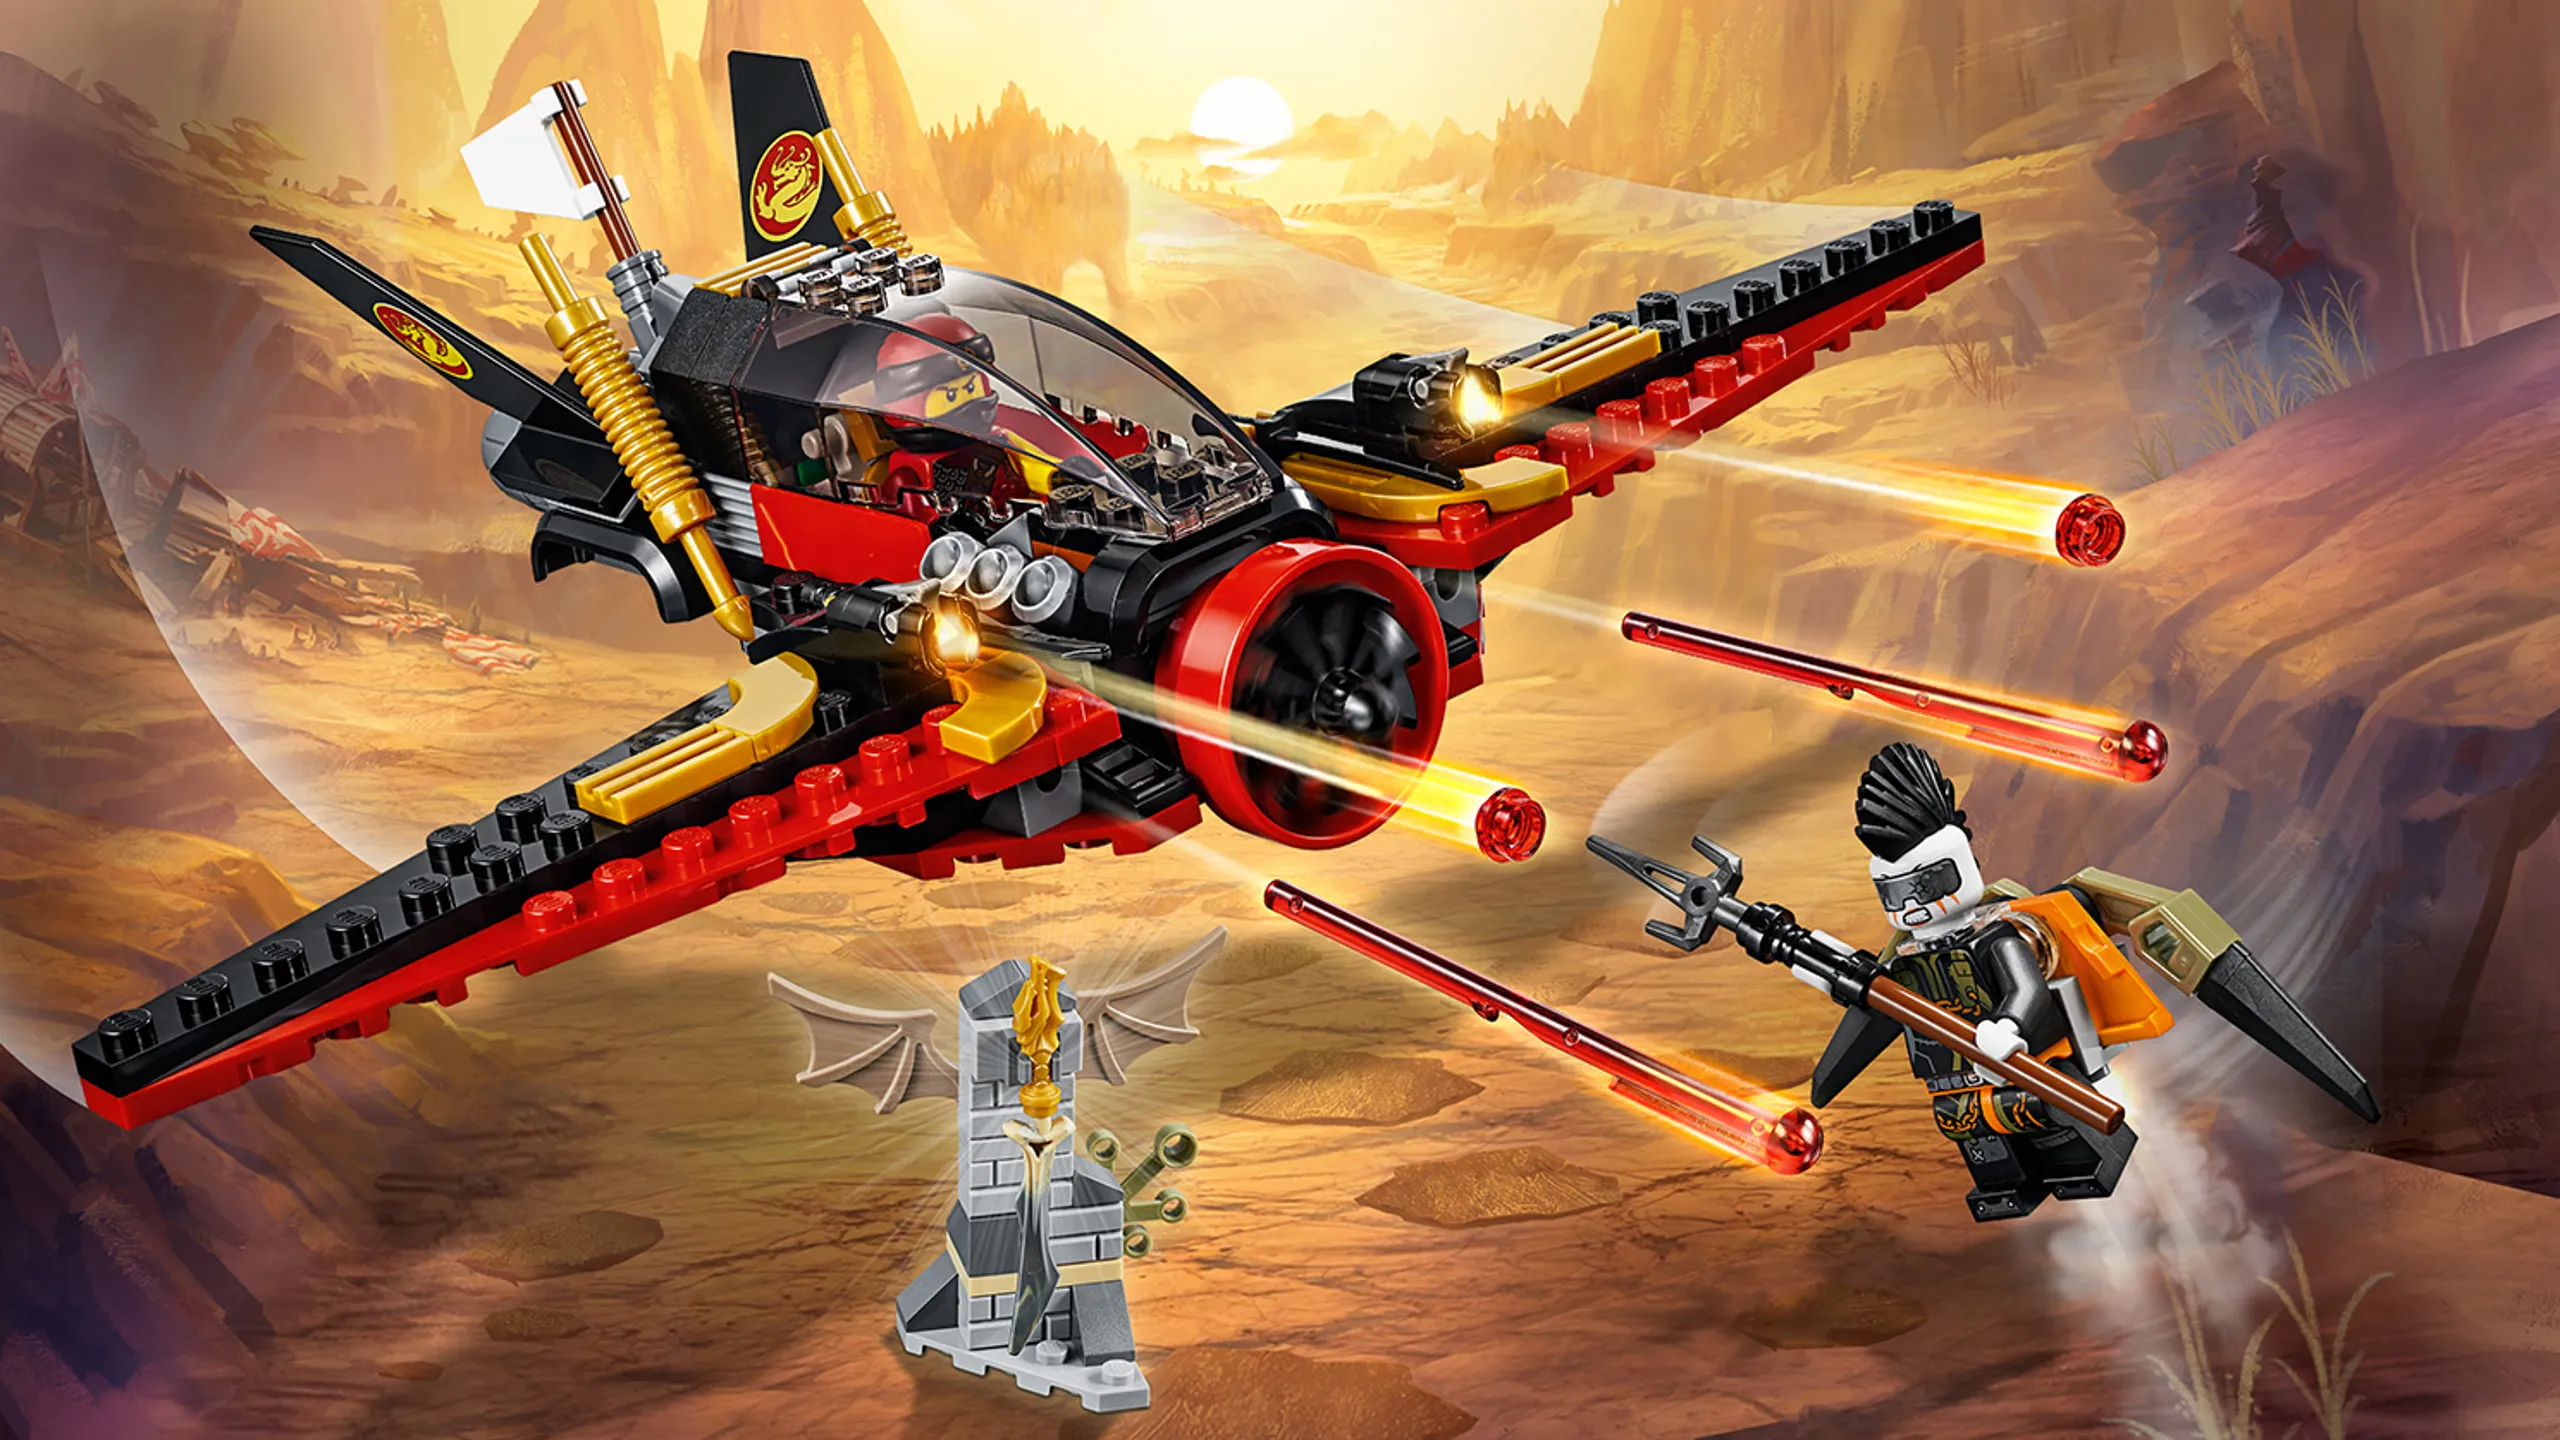 LEGO Ninjago - 70650 Destiny's Wing - Fire with red laser studs from this ninja plane in Kai's battle against an evil opponent.